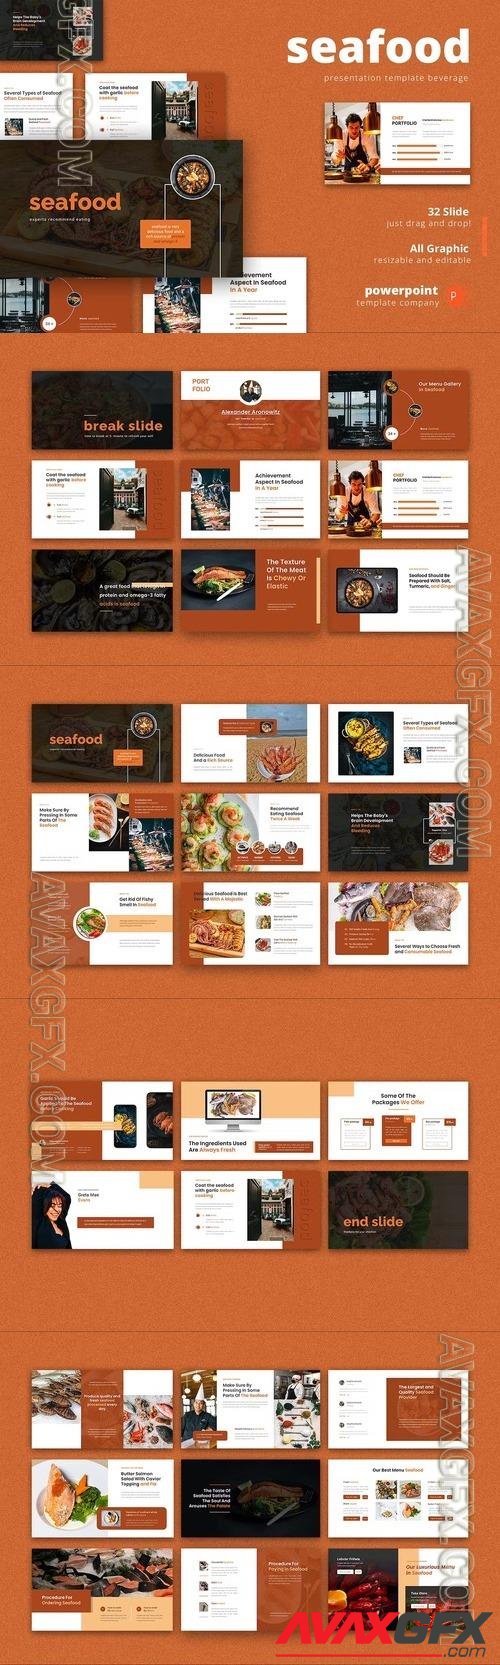 seafood – beverage and food Powerpoint Template [PPTX]